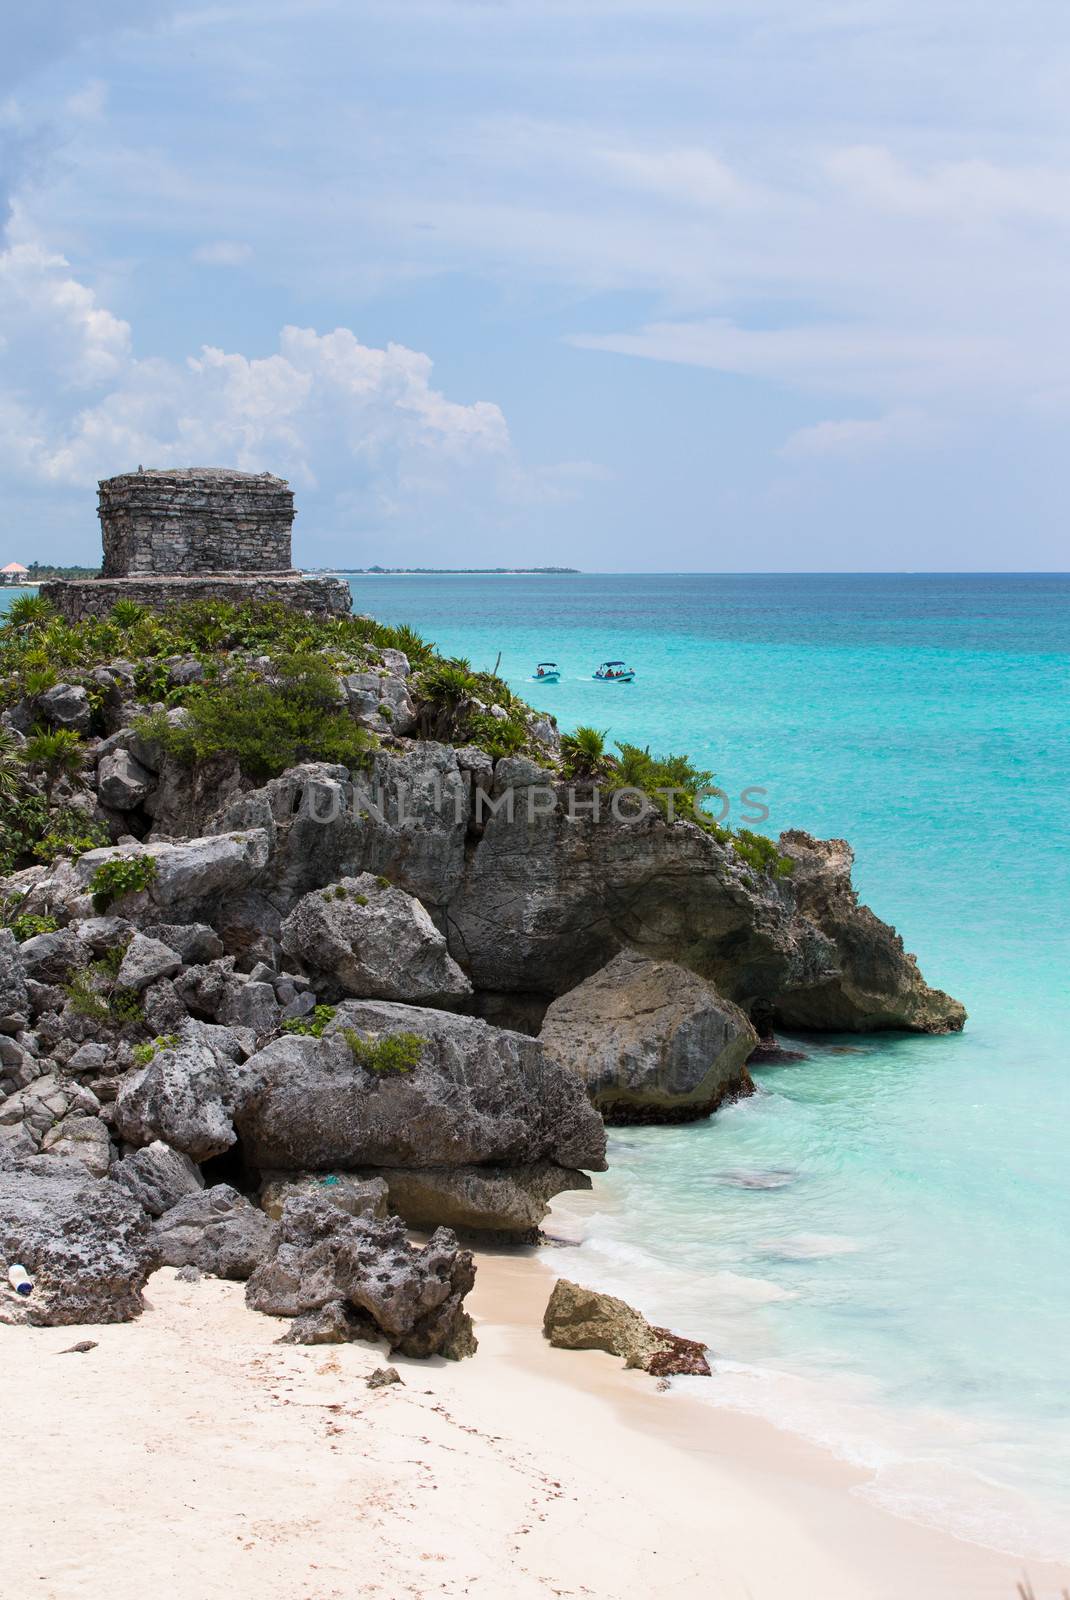 Offertories Building at Tulum Mexico by coskun